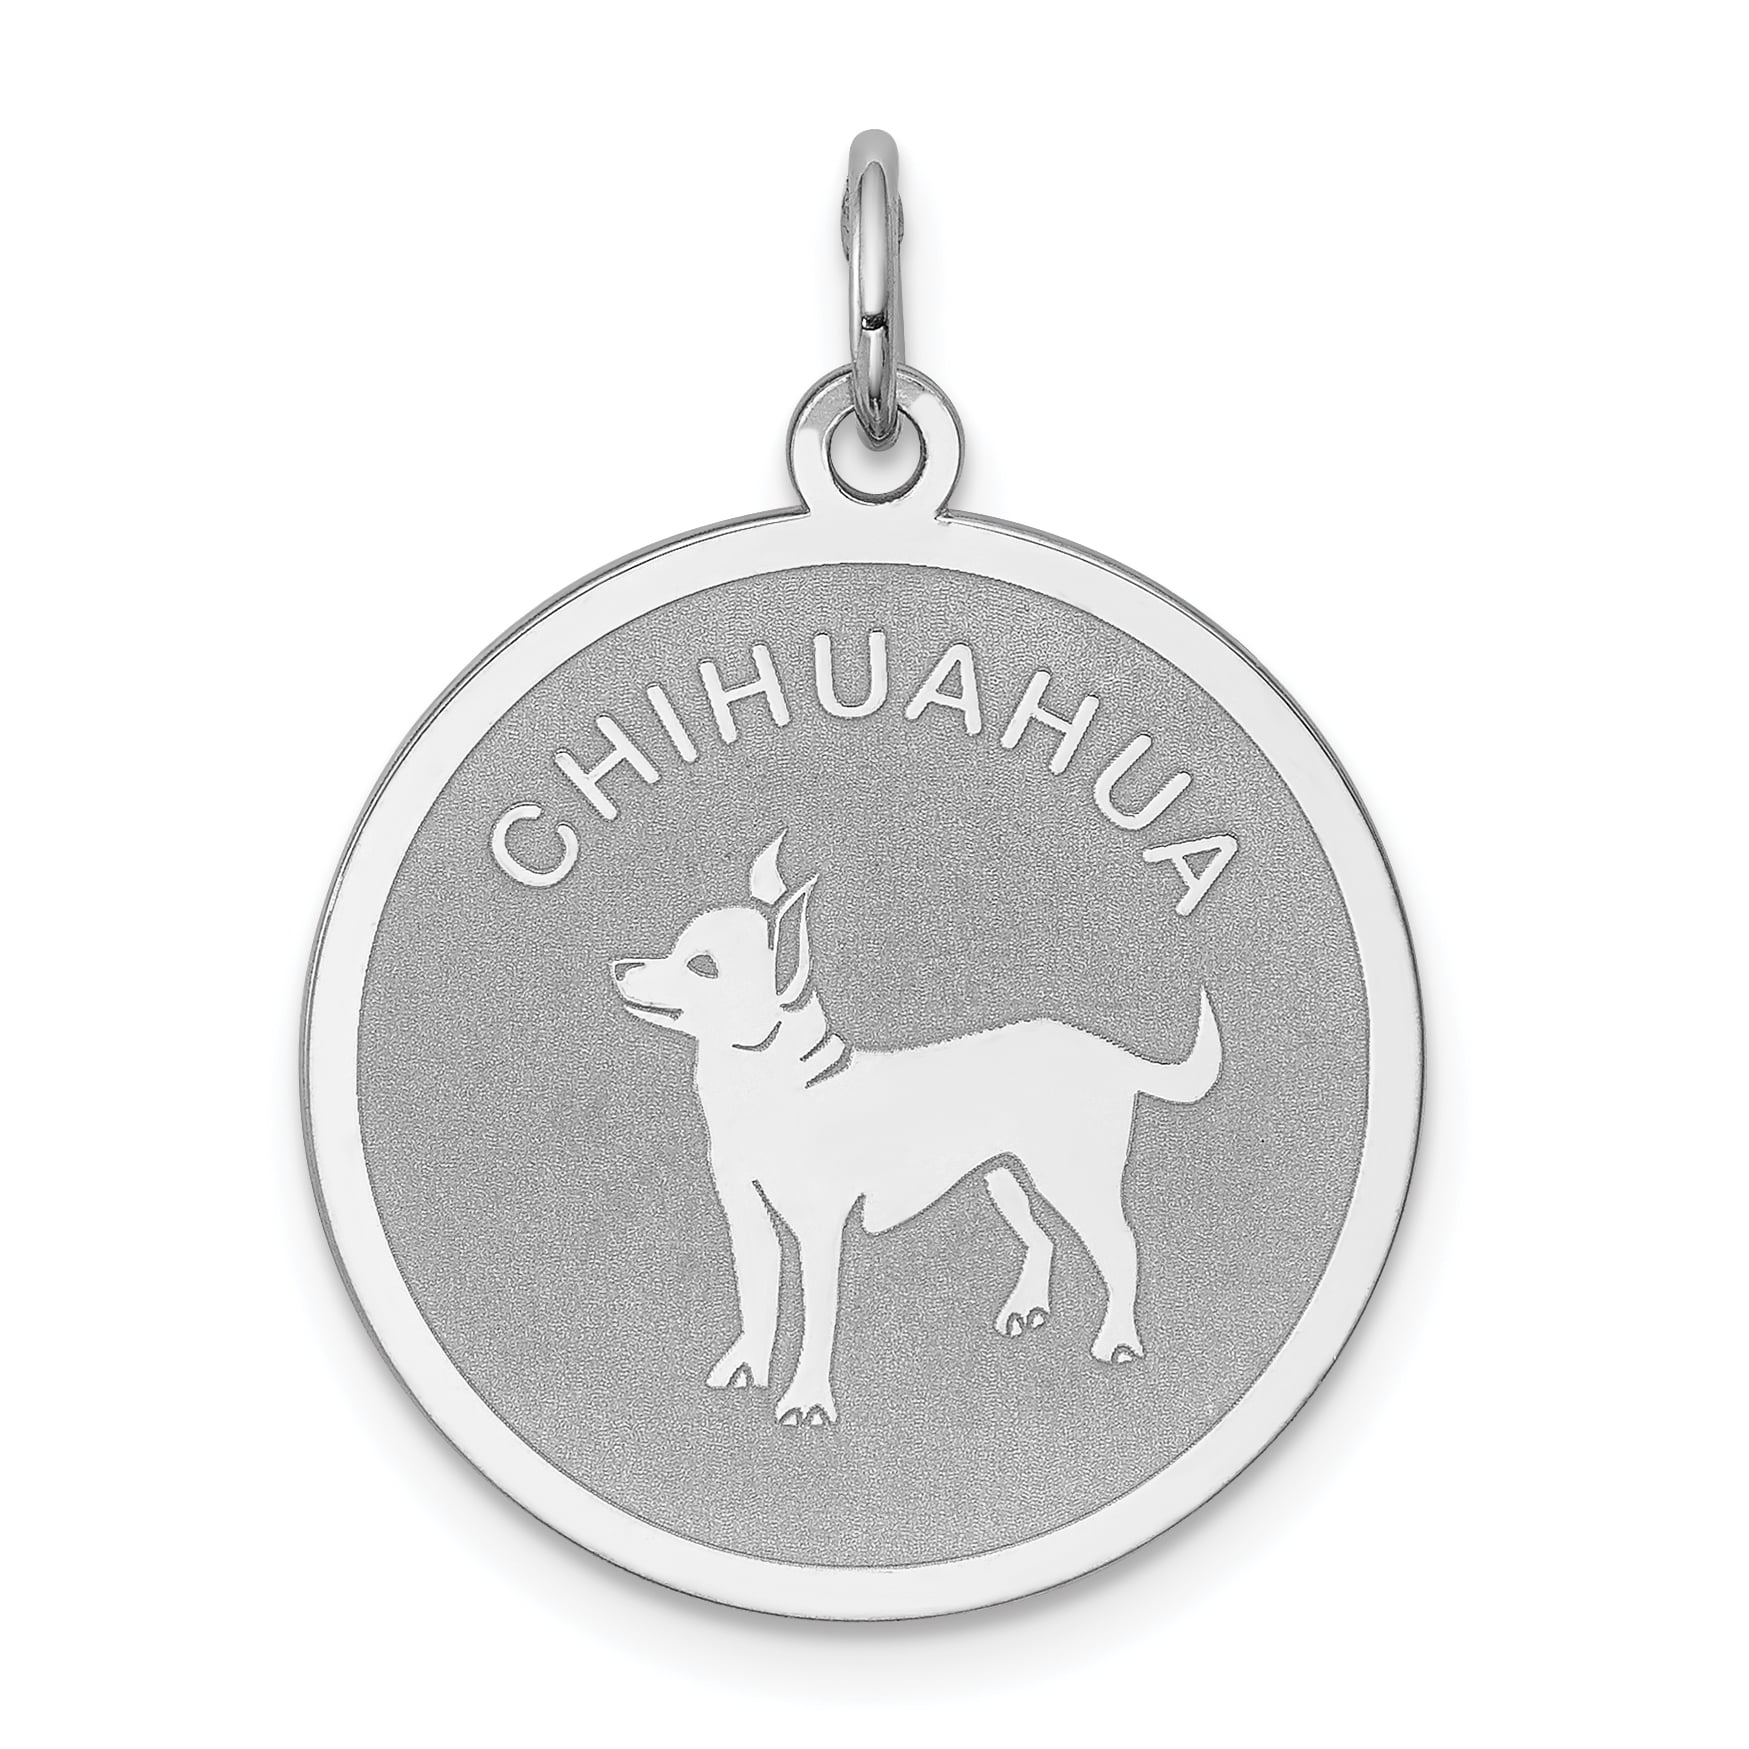 Chihuahua Pet Dog Cute Necklace Silver Pendant Jewelry Gift  Statement Vintage 